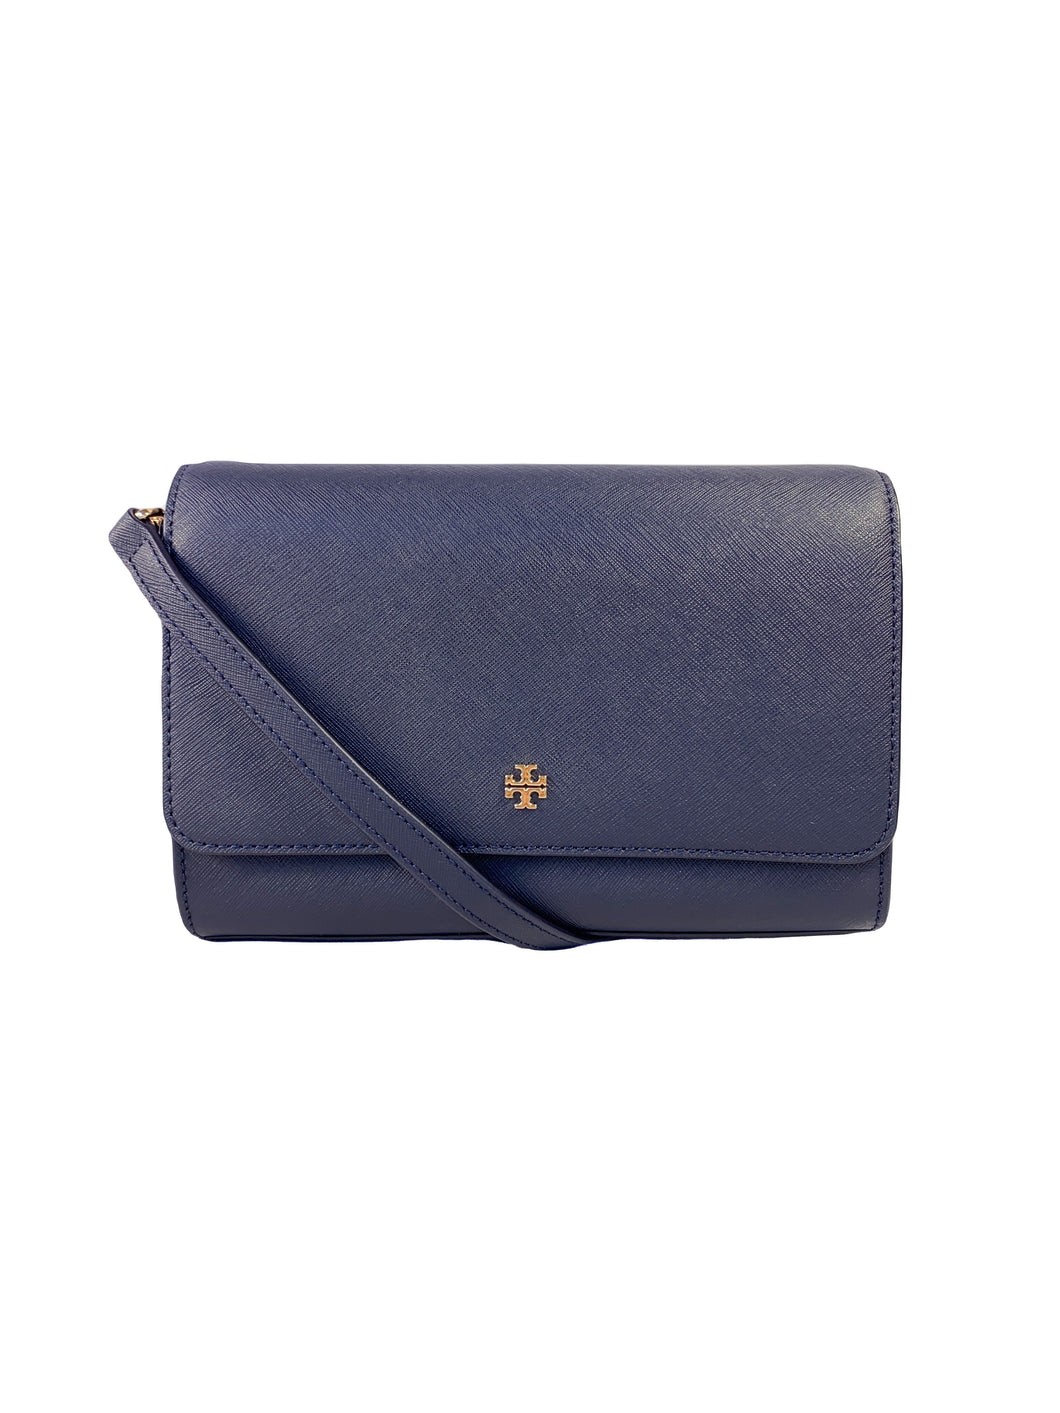 Tory Burch Emerson combo navy leather crossbody